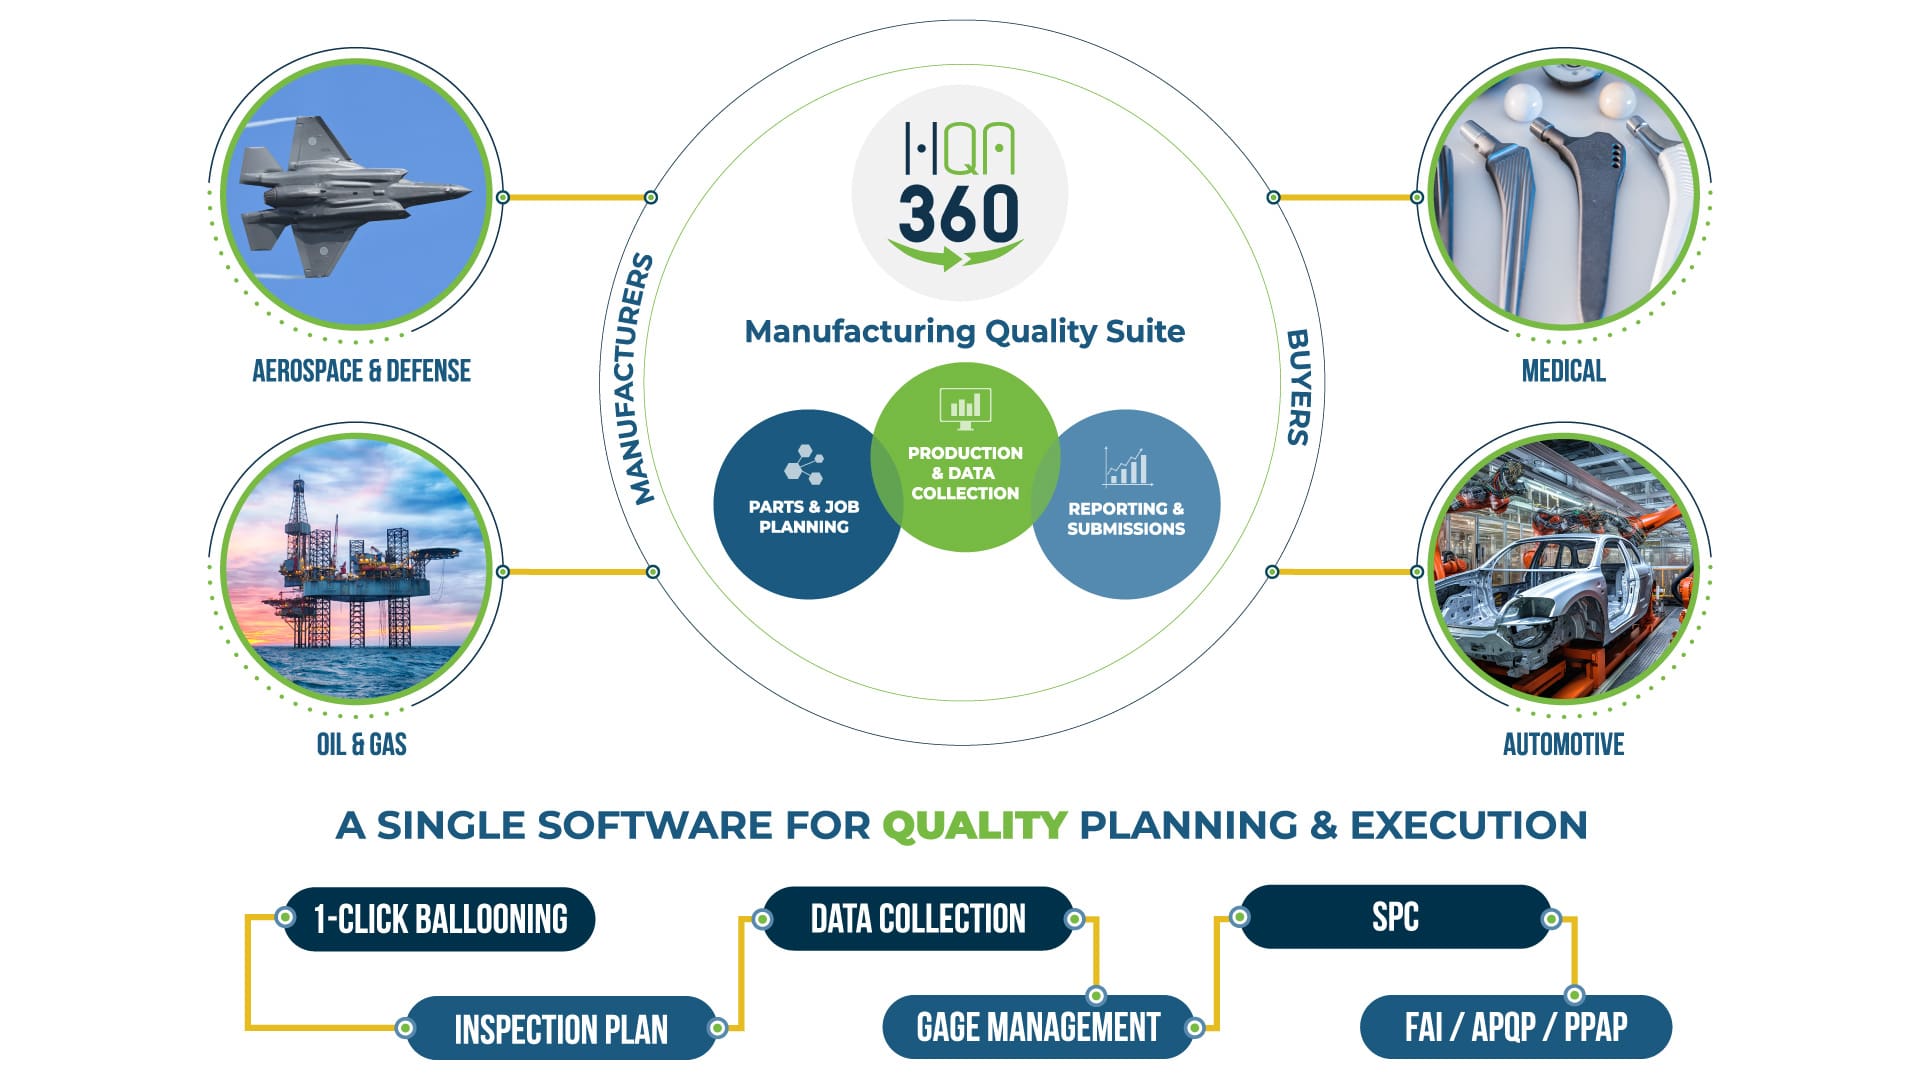 HQA 360 is a manufacturing quality management software (QMS) with 10click ballooning, SOC, FAI, APQP, PPAP and more in a single software for quality planning and execution